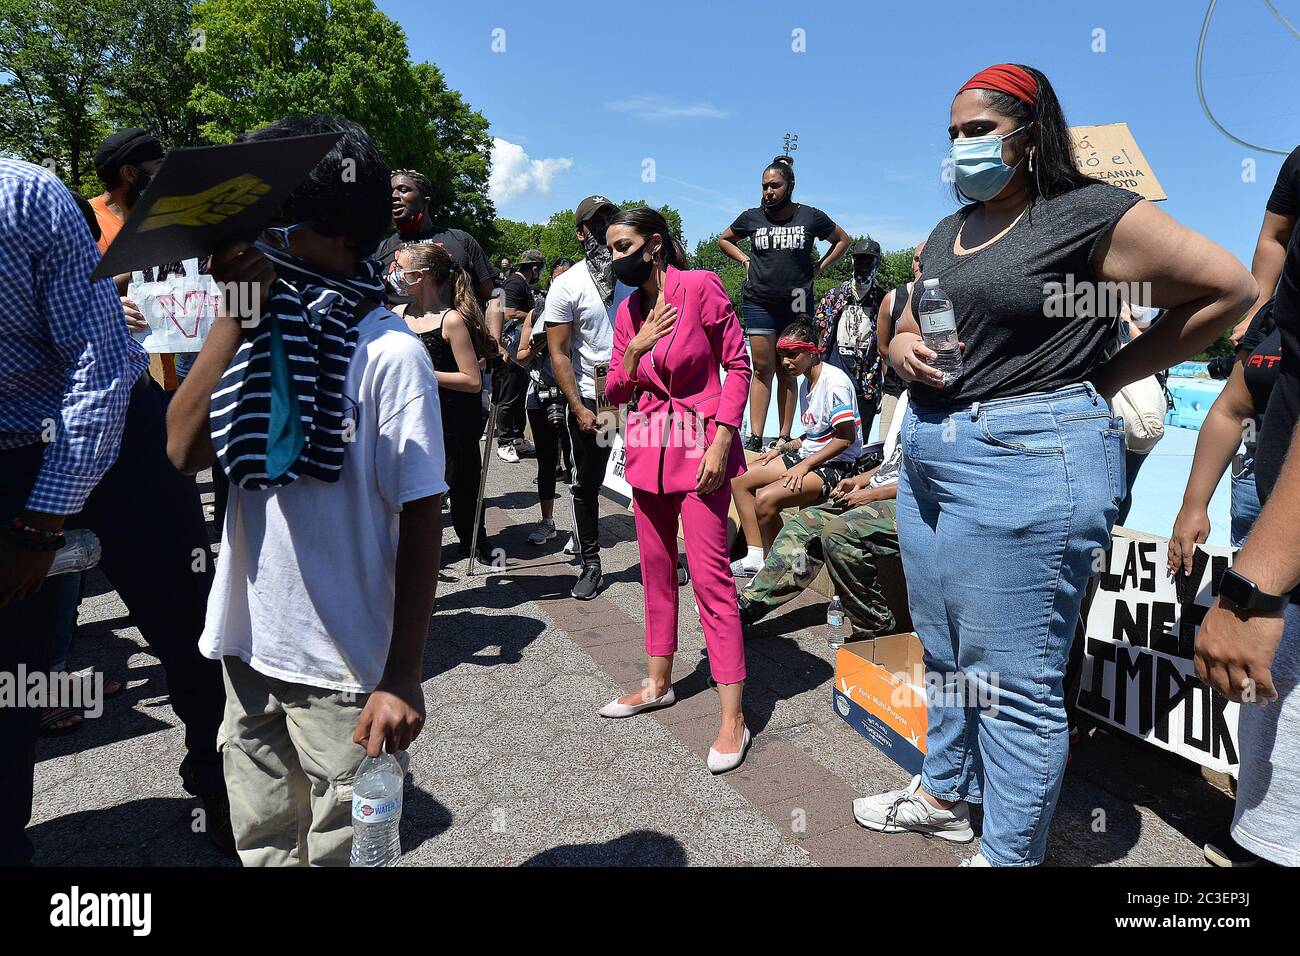 Wearing a mask in the time of COVID-19, U.S. Representative Alexandria Ocasio-Cortez (purple) reacts as rallygoer is collapses at a Juneteenth celebration rally in front of the Unisphere in Flushing Meadows-Corona Park in the borough of Queens, New York, June 19, 2020. Juneteenth is celebrated as a commemoration of the ending of slavery in the United States.  The announcement came two year after President Abraham Lincoln's Credit: Sipa USA/Alamy Live News Stock Photo